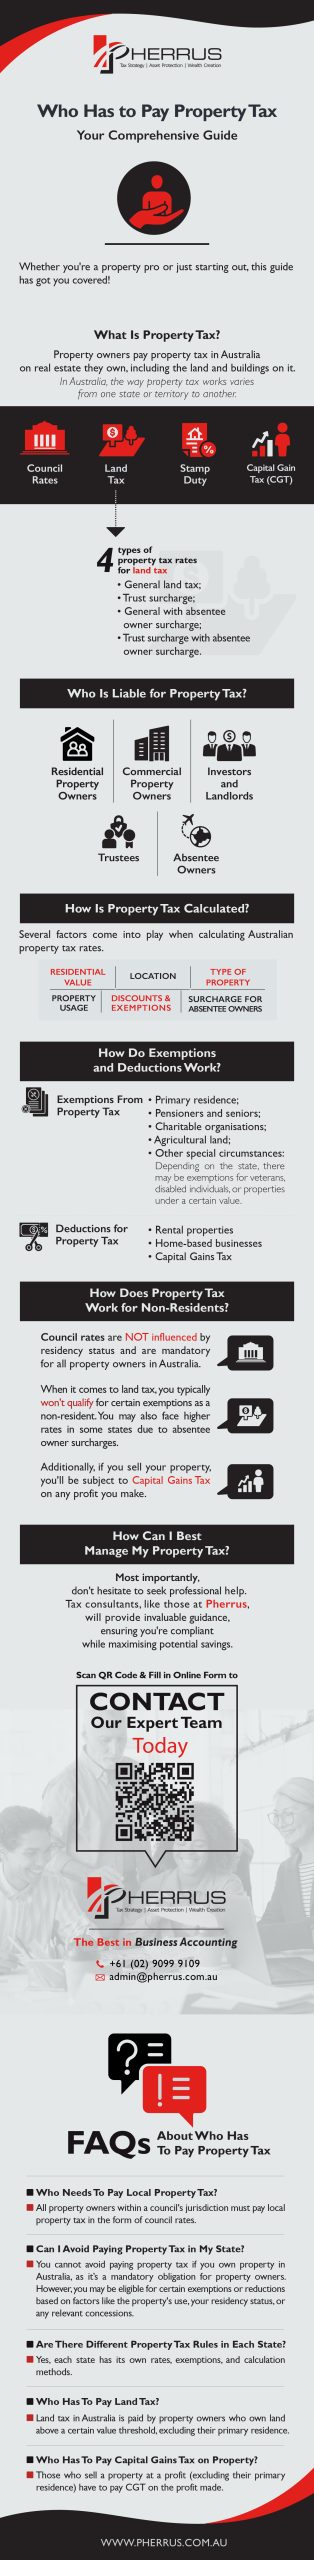 Who Has to Pay Property Tax - Infographic